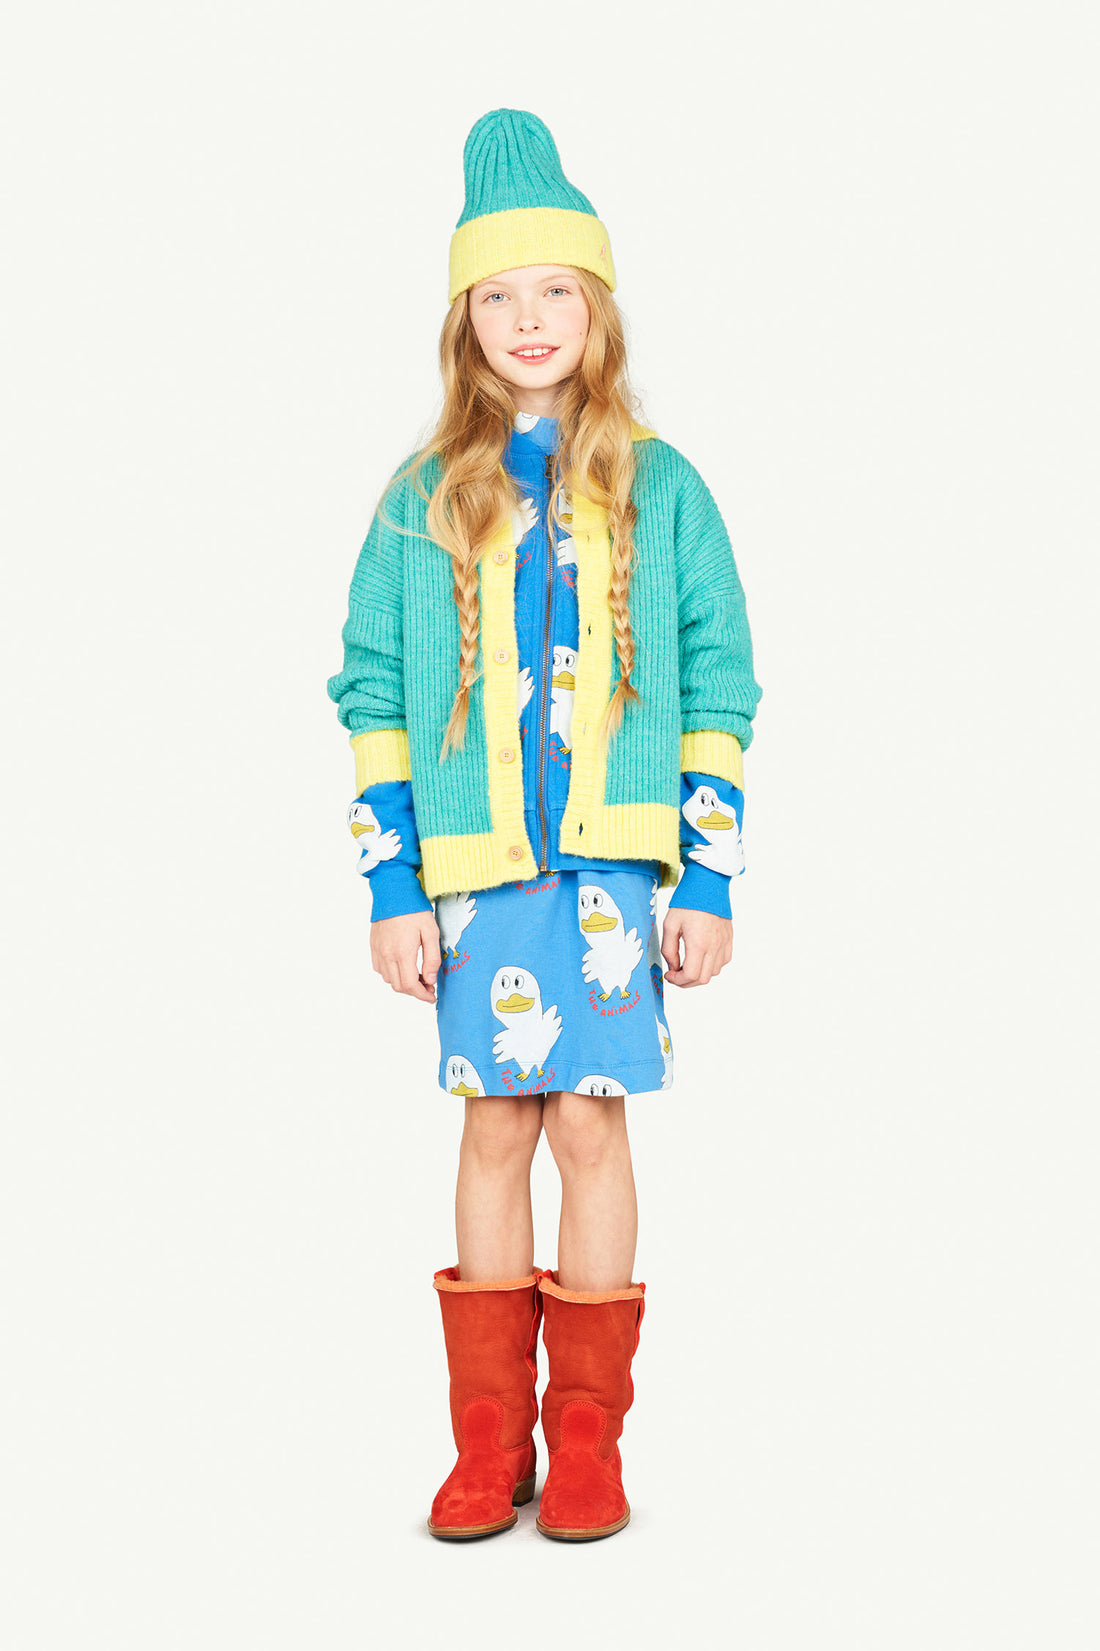 The animals observatory - Bicolor toucan kids cardigan - Turquoise logo